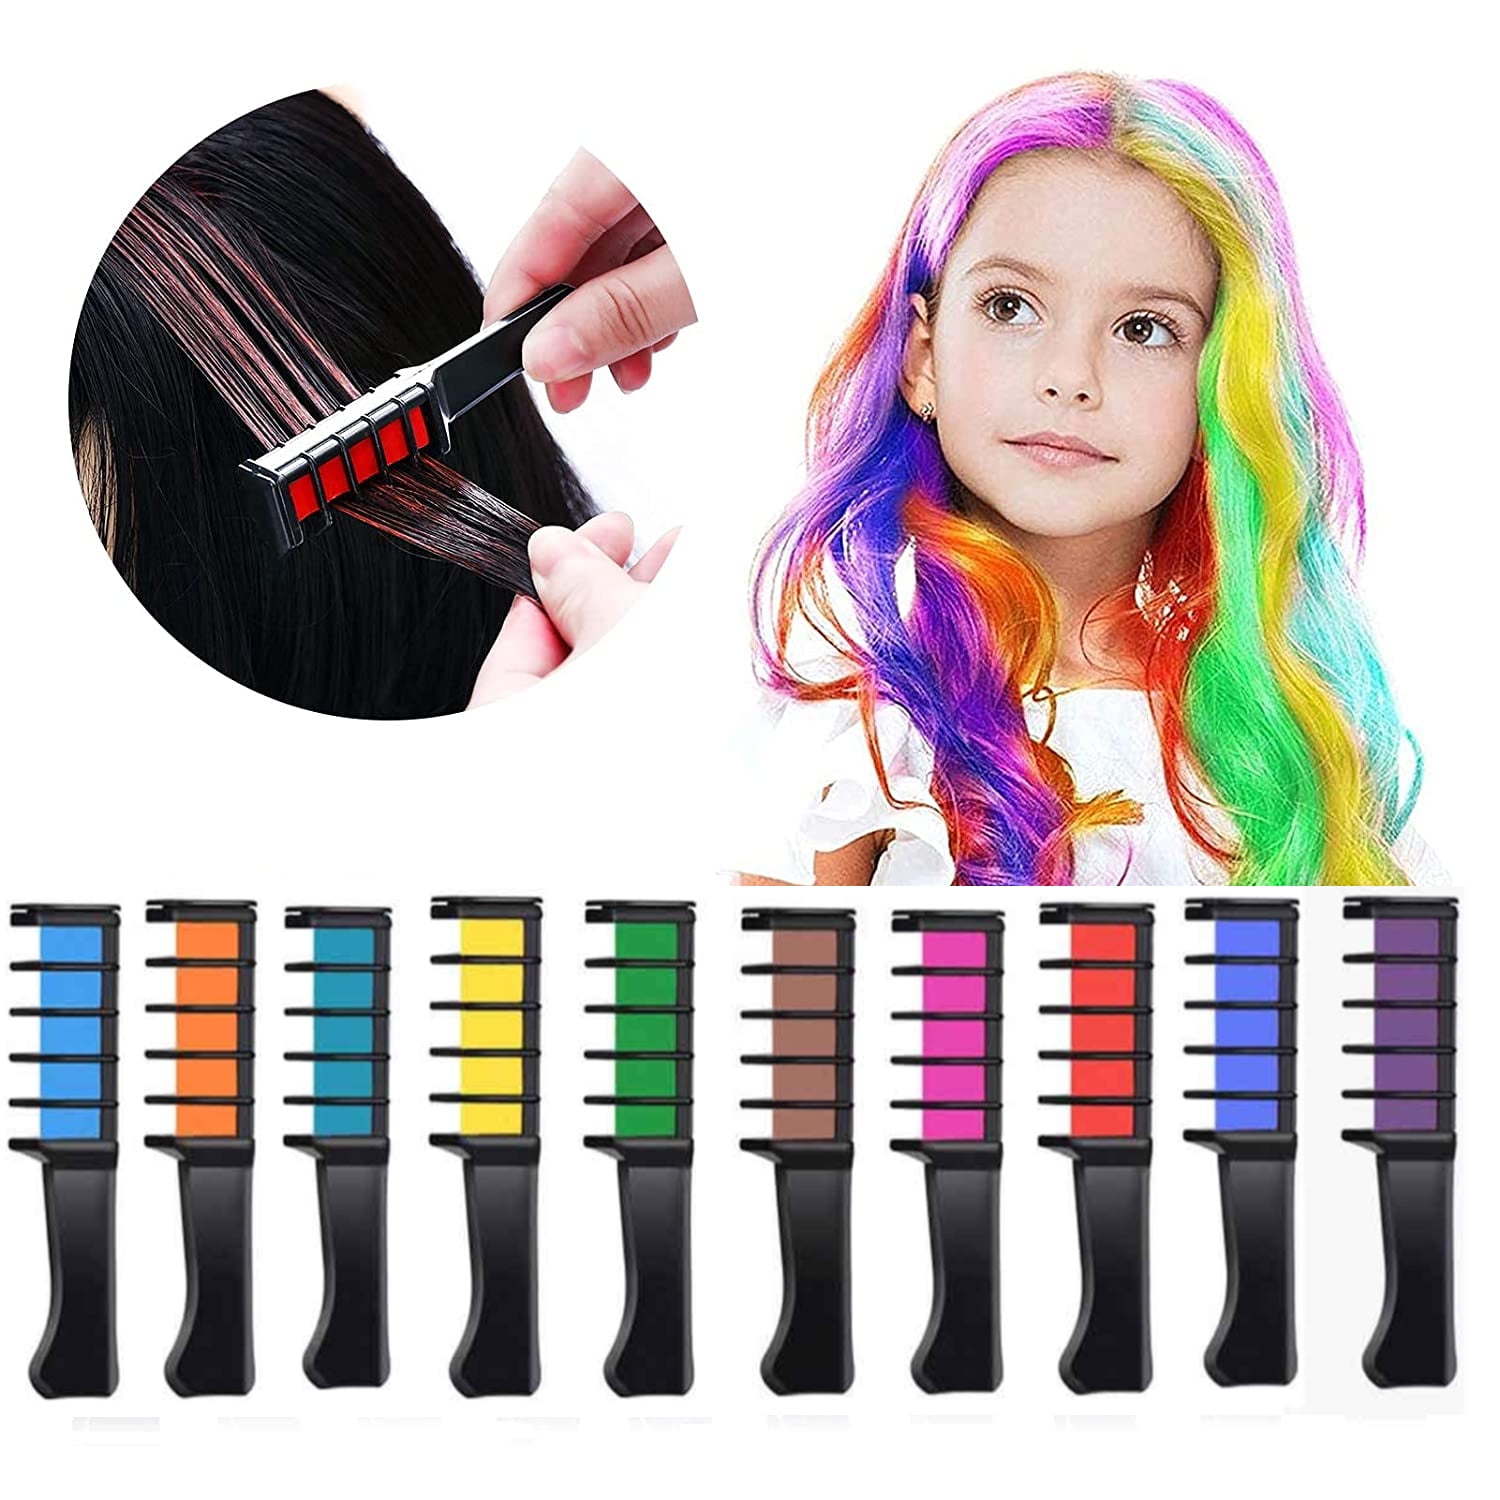 10 Color Hair Chalk for Girls Kids Adults and Pets-New Hair Chalk Comb  Temporary Washable Hair Color Dye,Washable, Hair-harmless Perfect for  Christmas Party,Cosplay DIY 